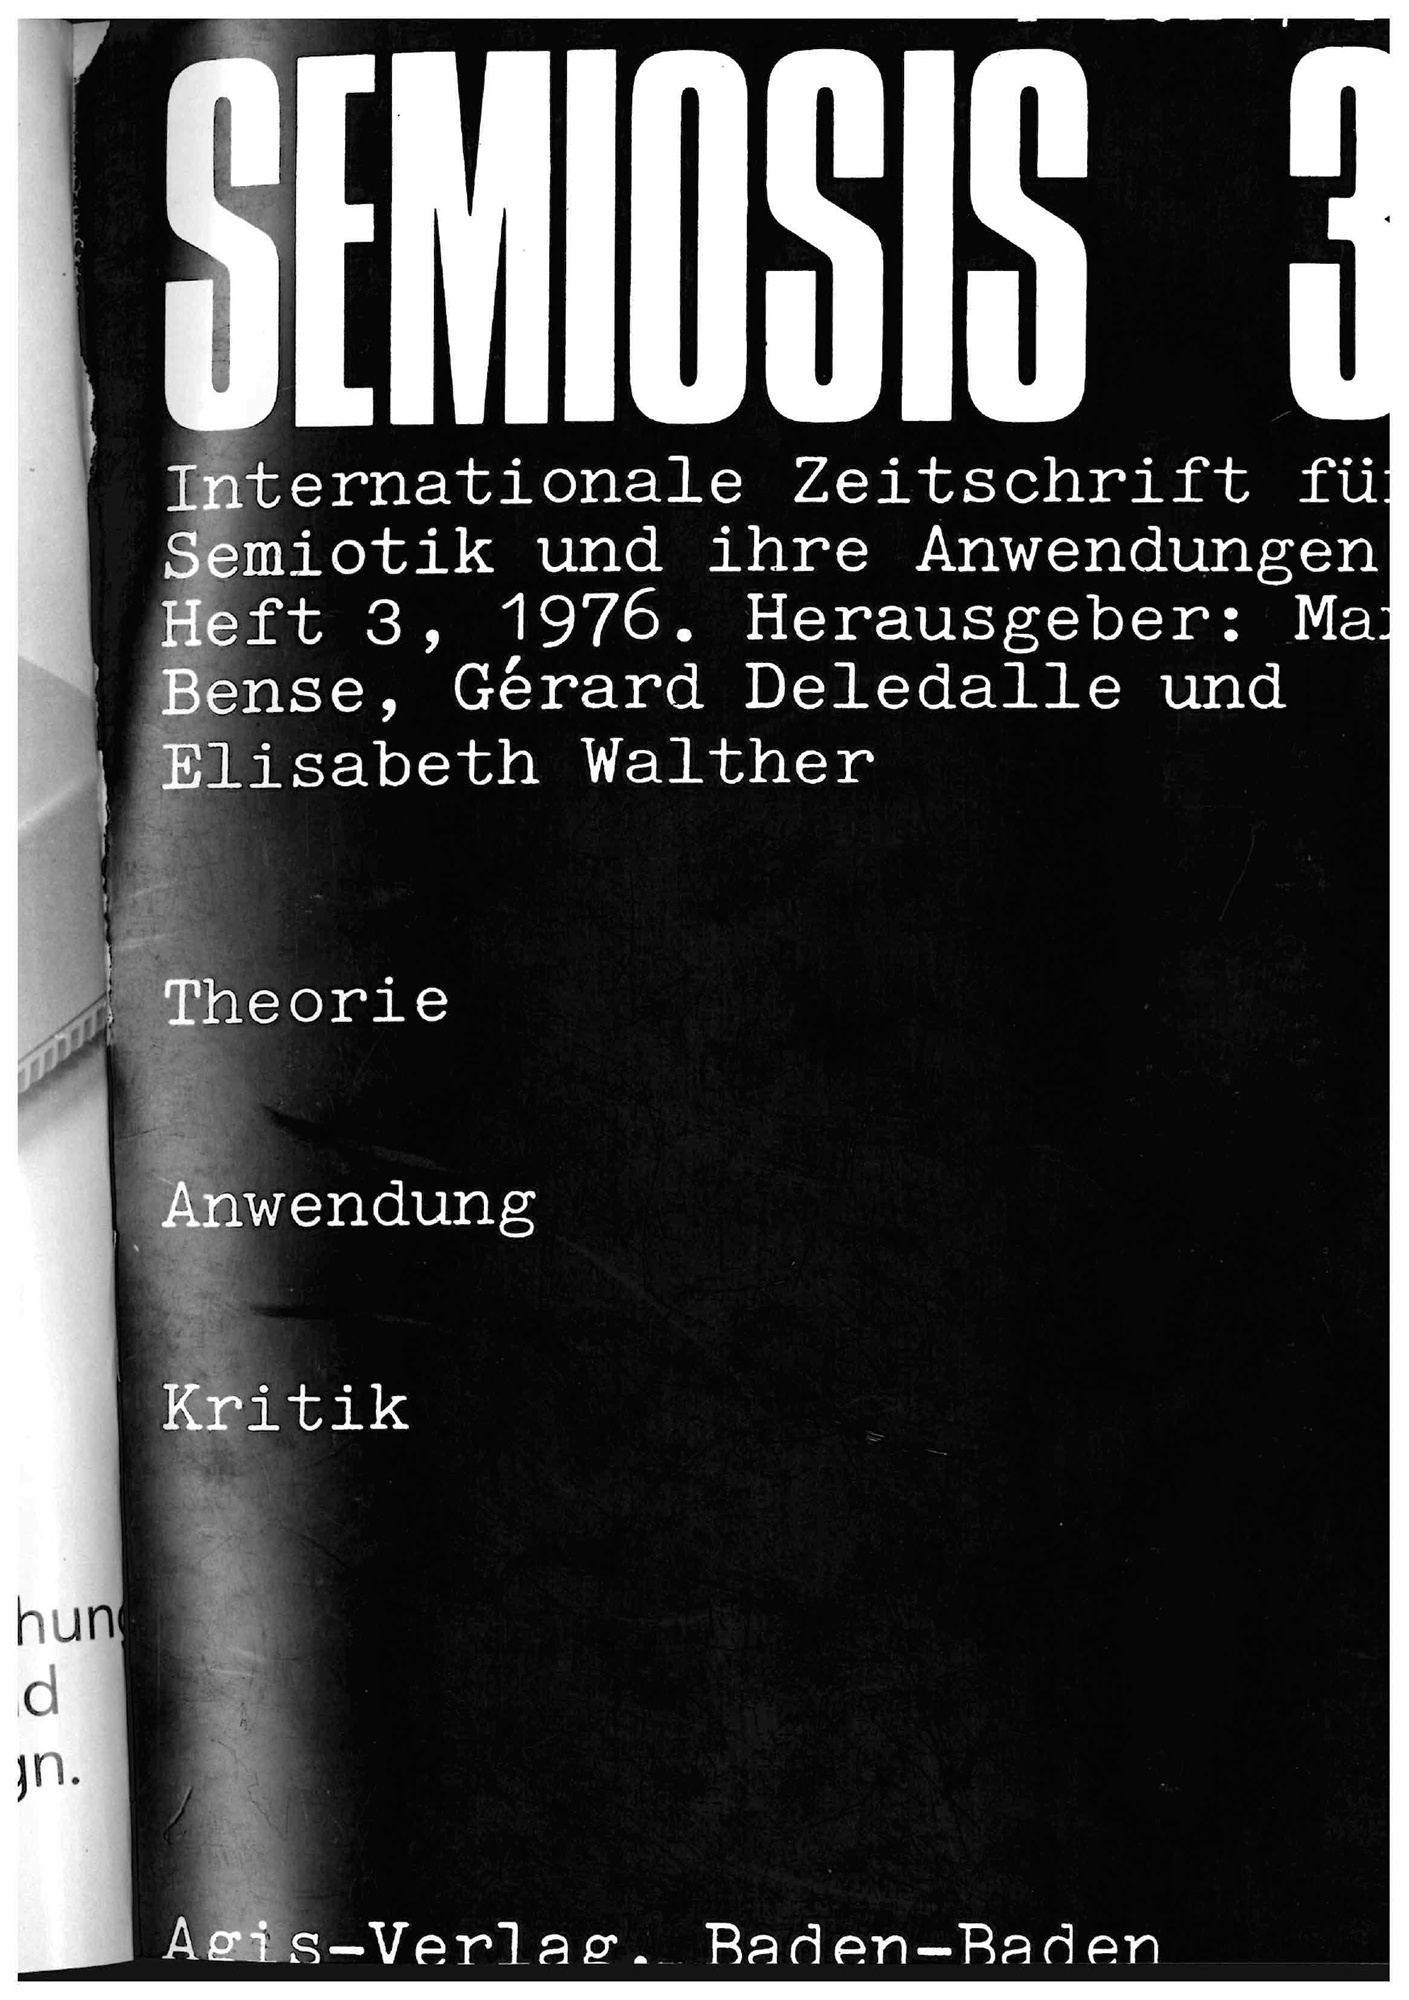 Cover of the magazine "semiosis": white text on black background